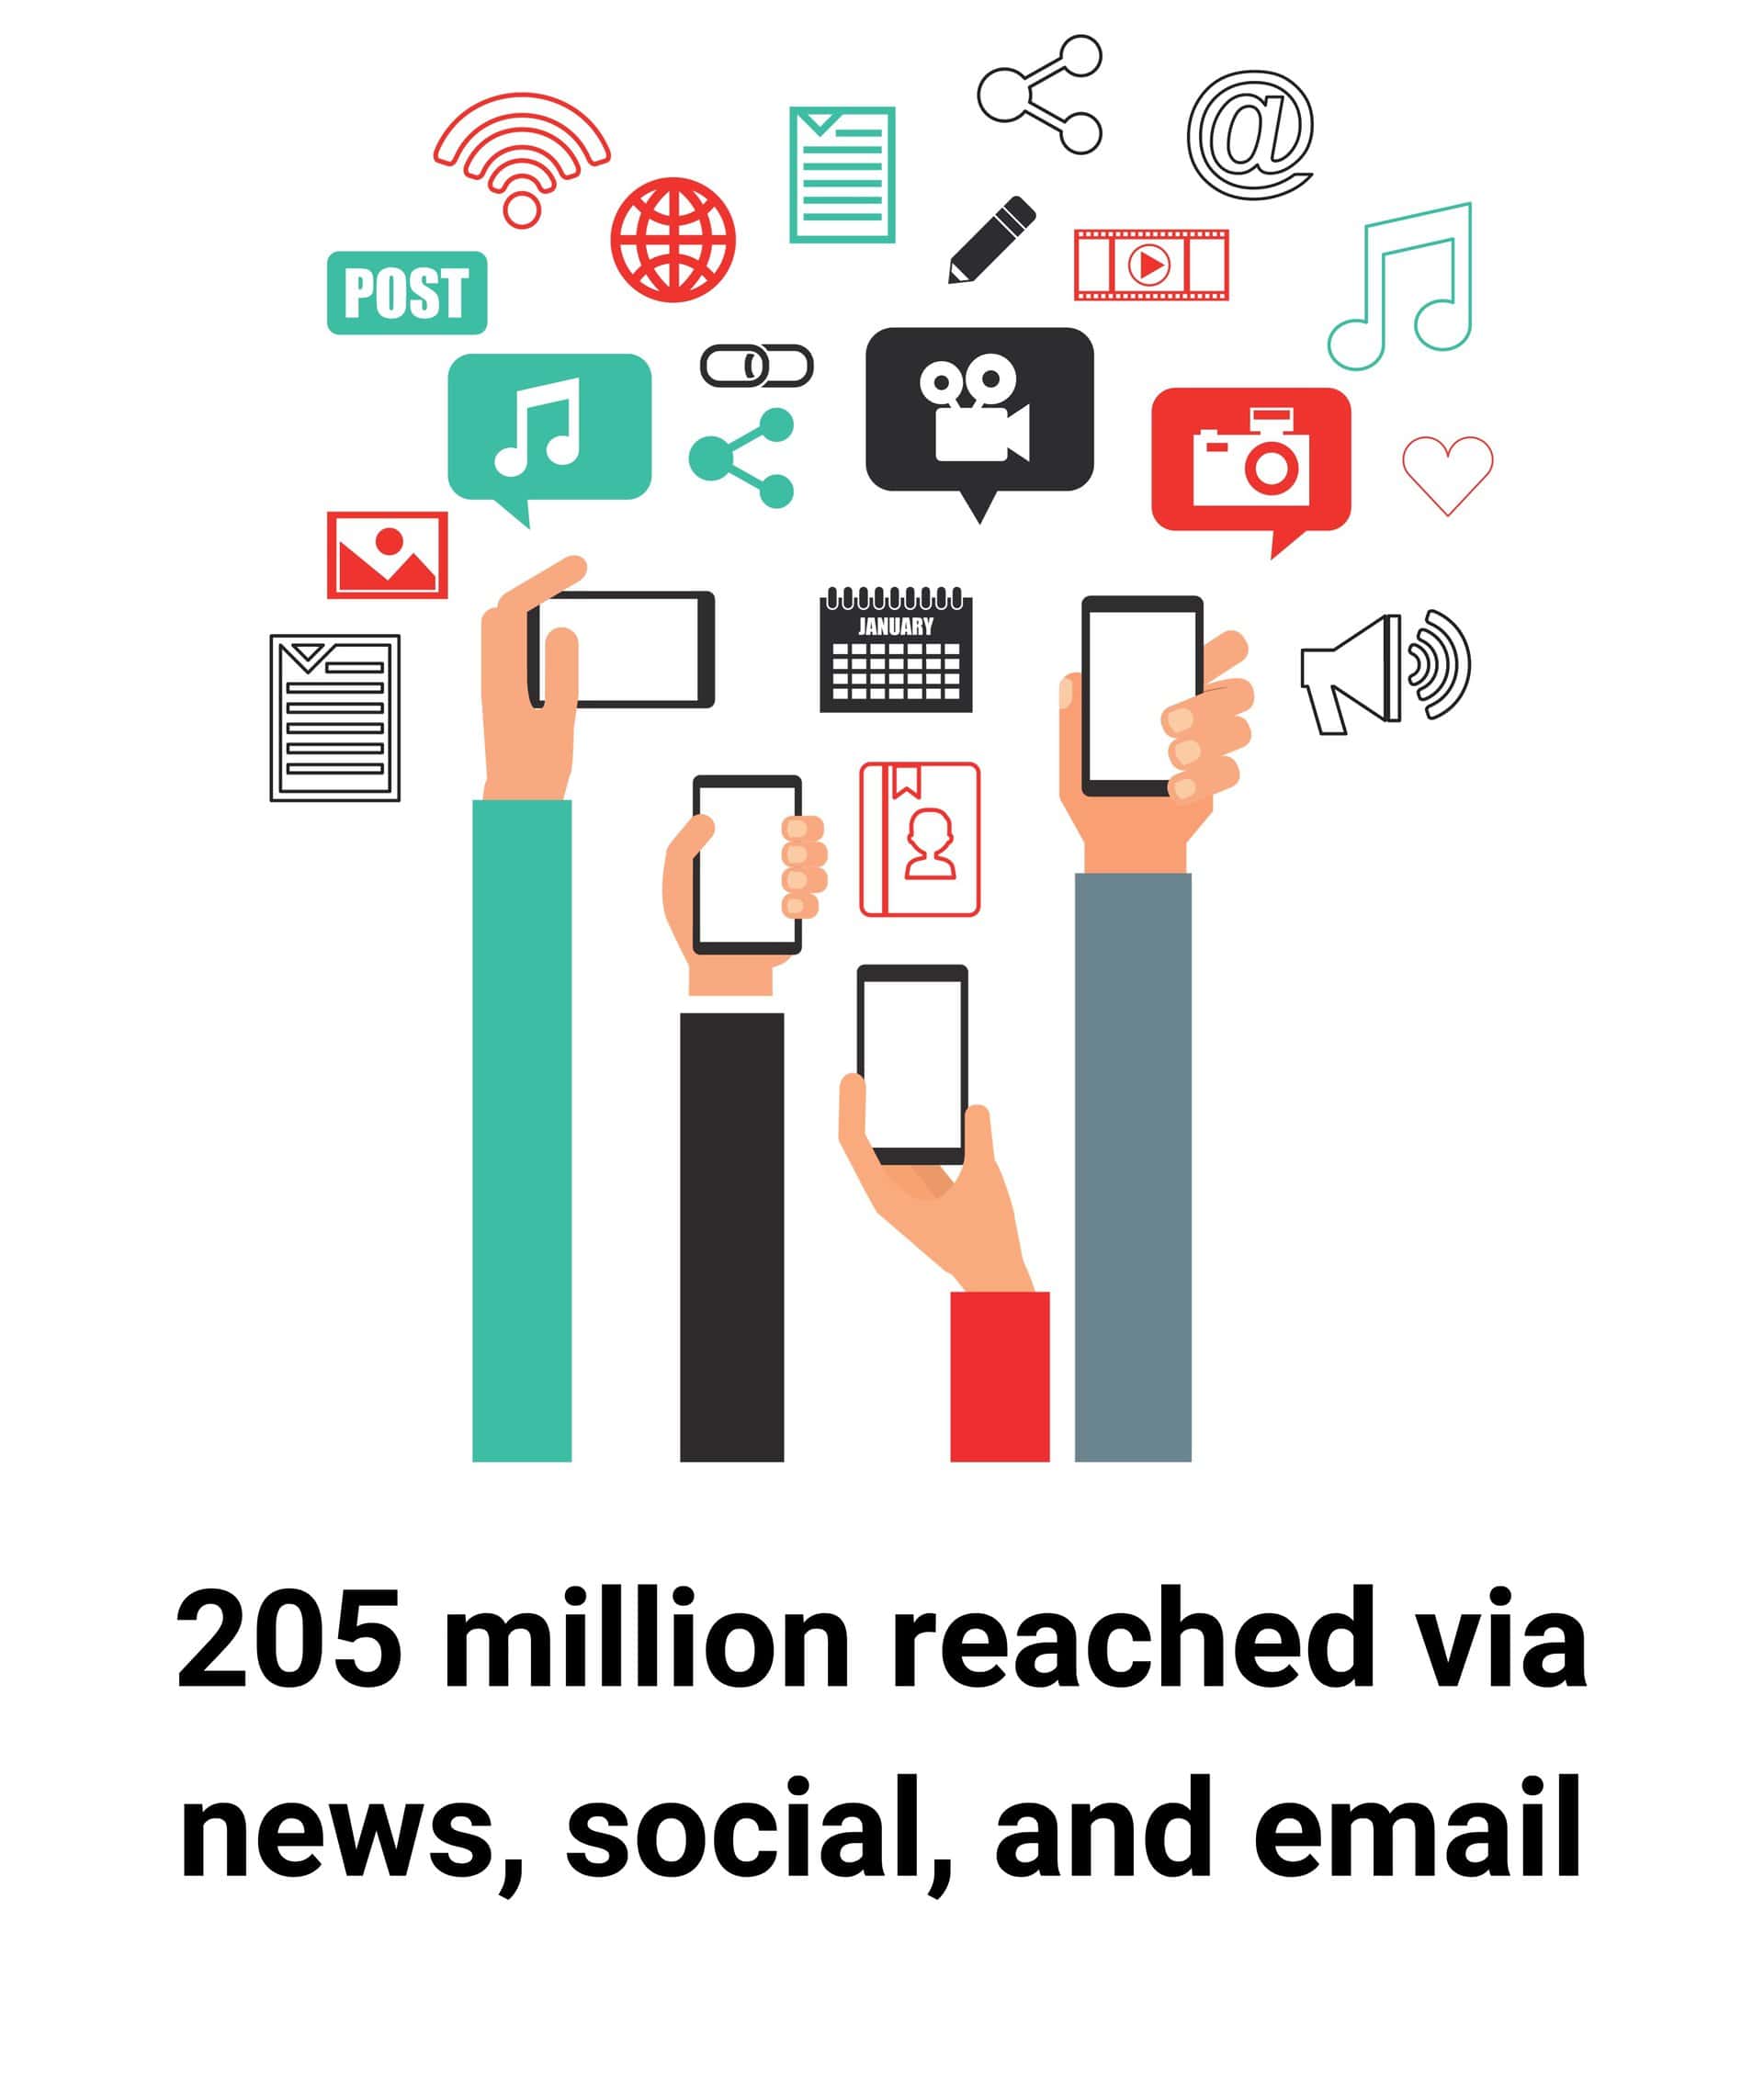 Hands holding cell phones surrounded by various digital technology icons. 205 million reached via news, social, and email.